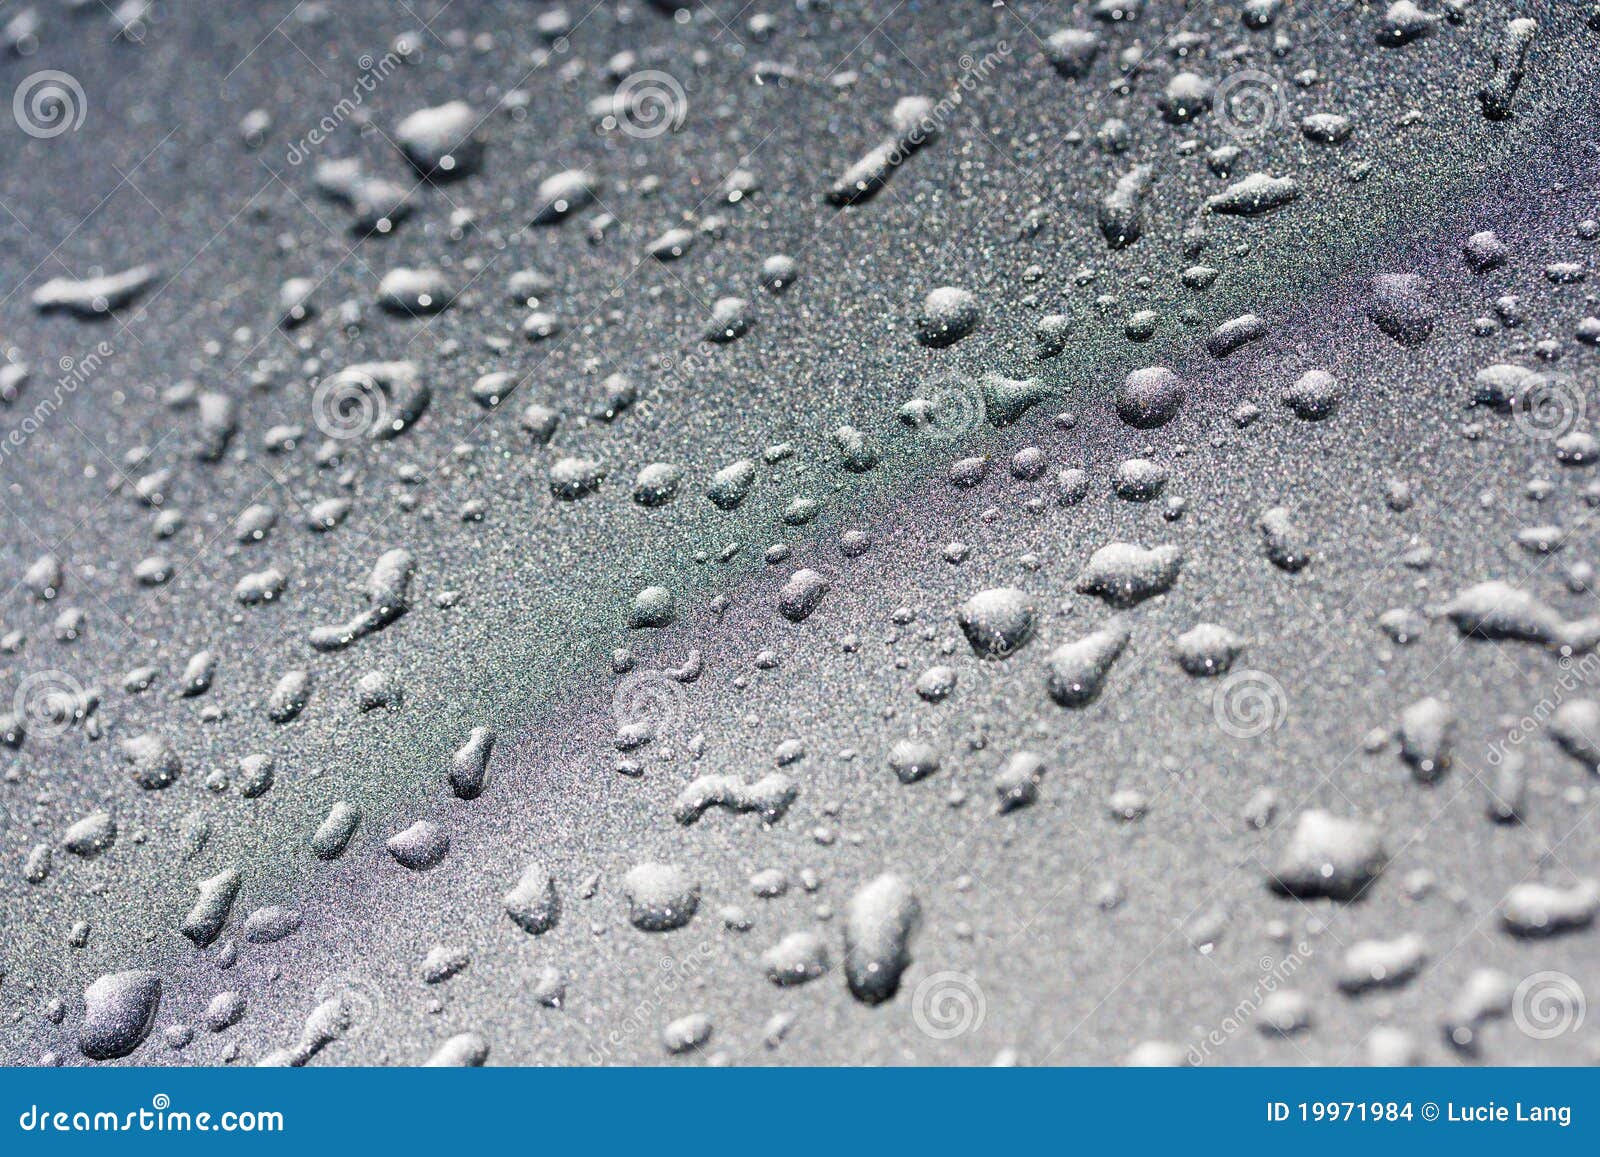 water droplets on a silver metalic background